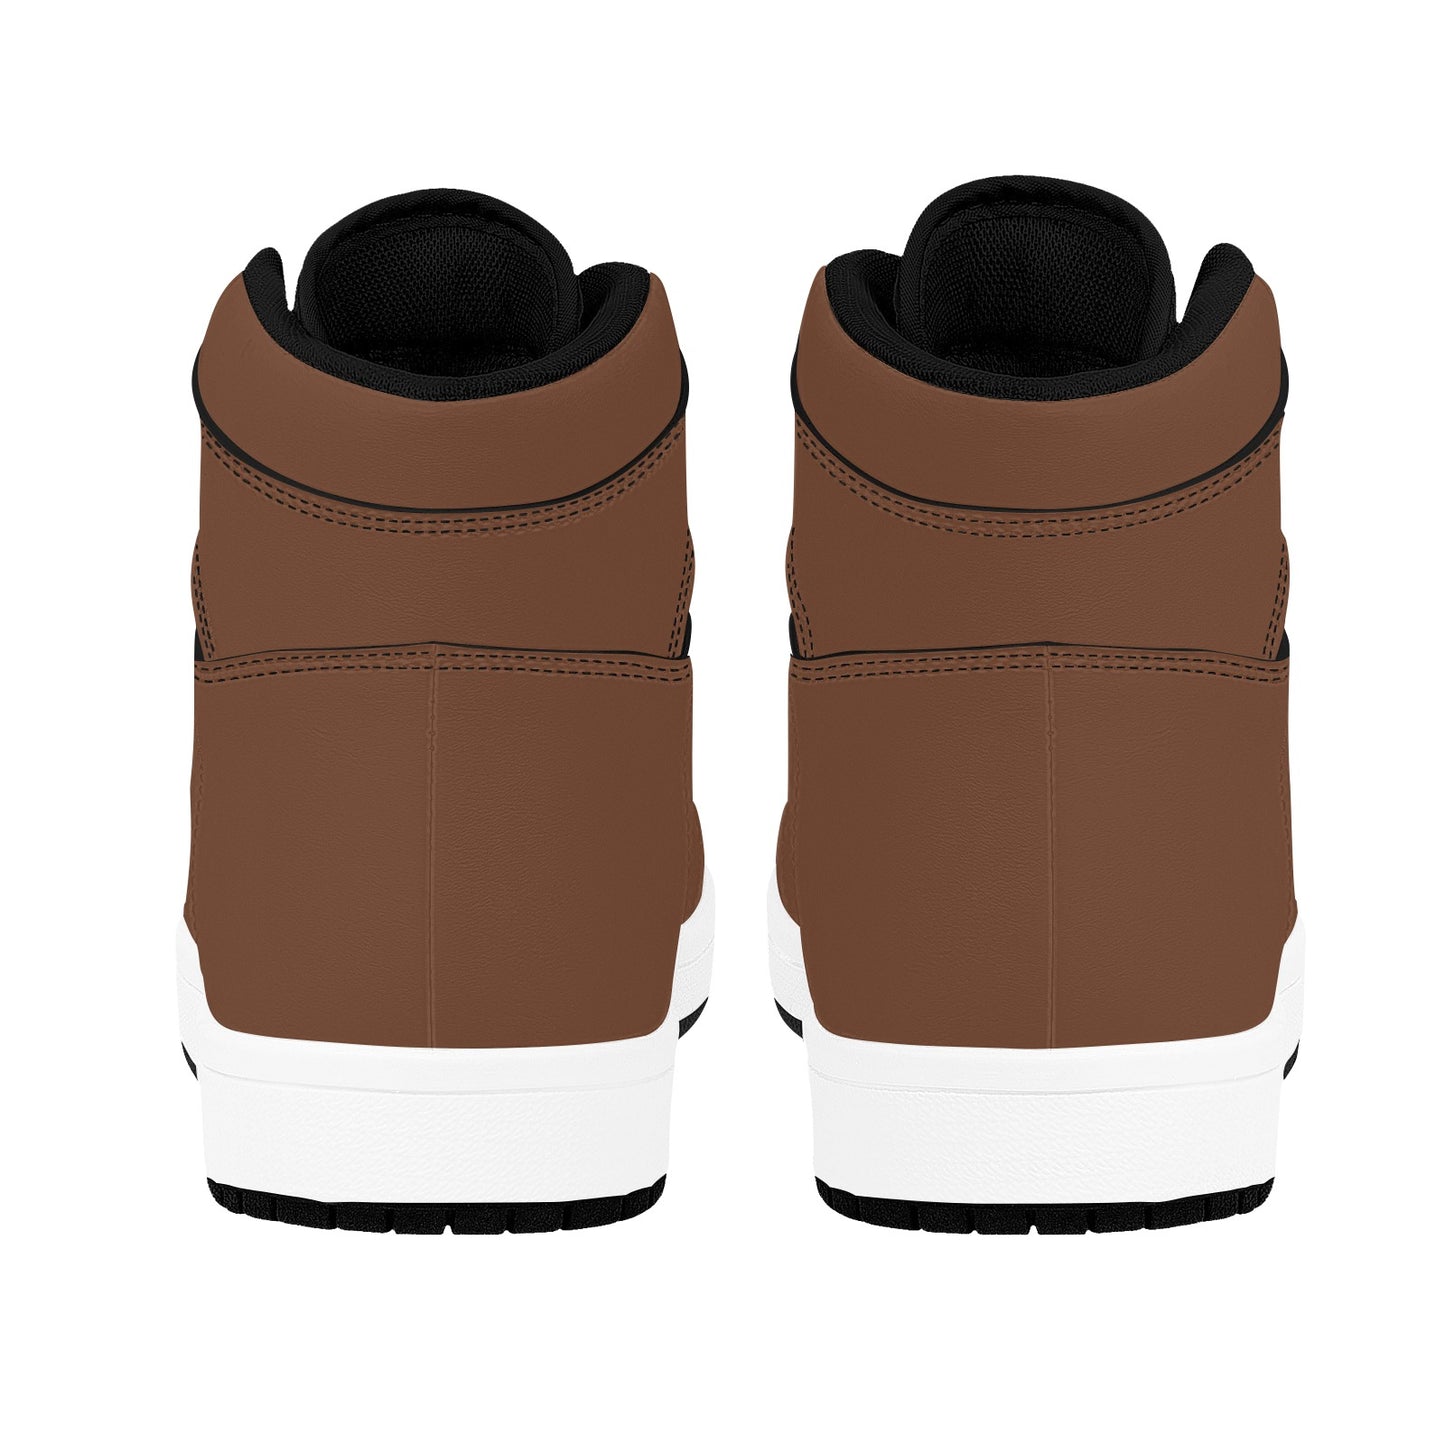 Brown High Top Sneakers Brown and White High Top Sneakers Men's High Top Sneakers